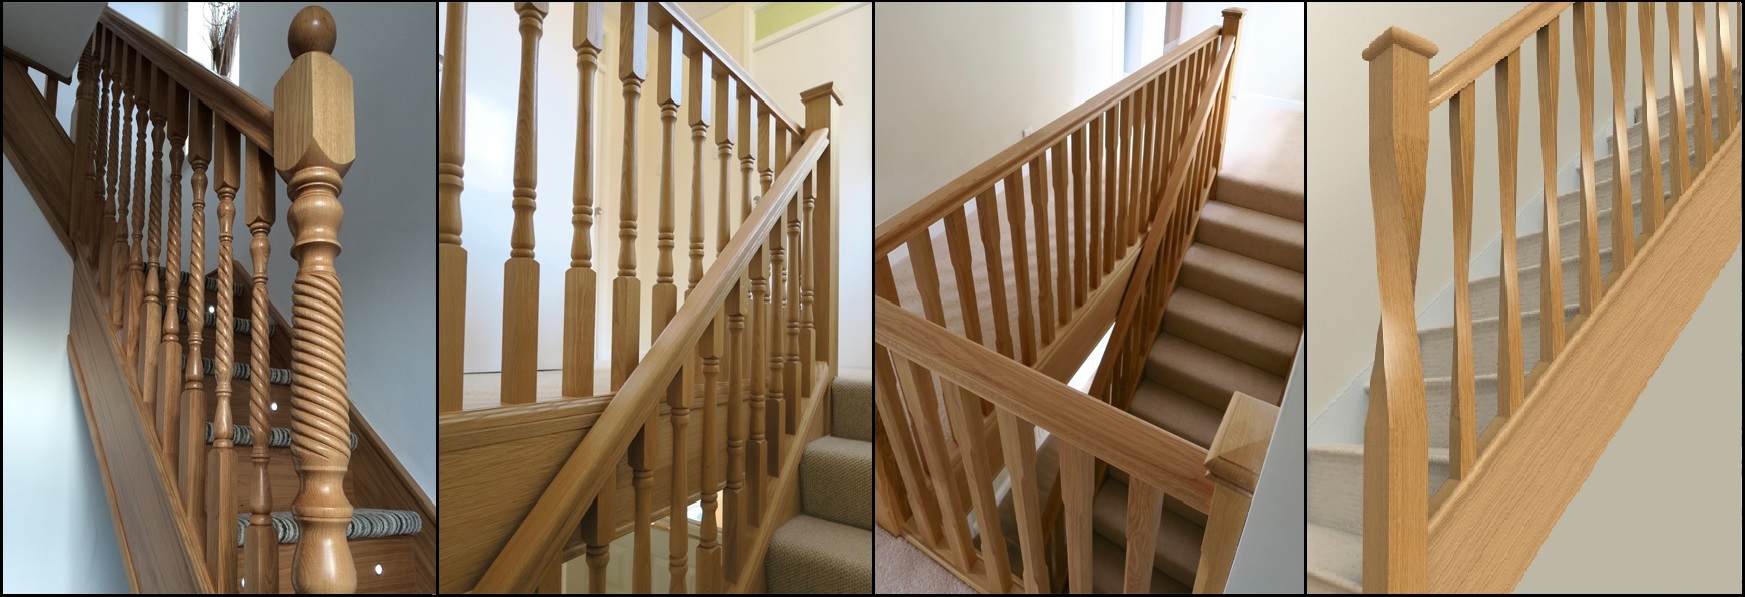 J And J Stair Parts, J&J Stair parts, Quality Stair Parts ...